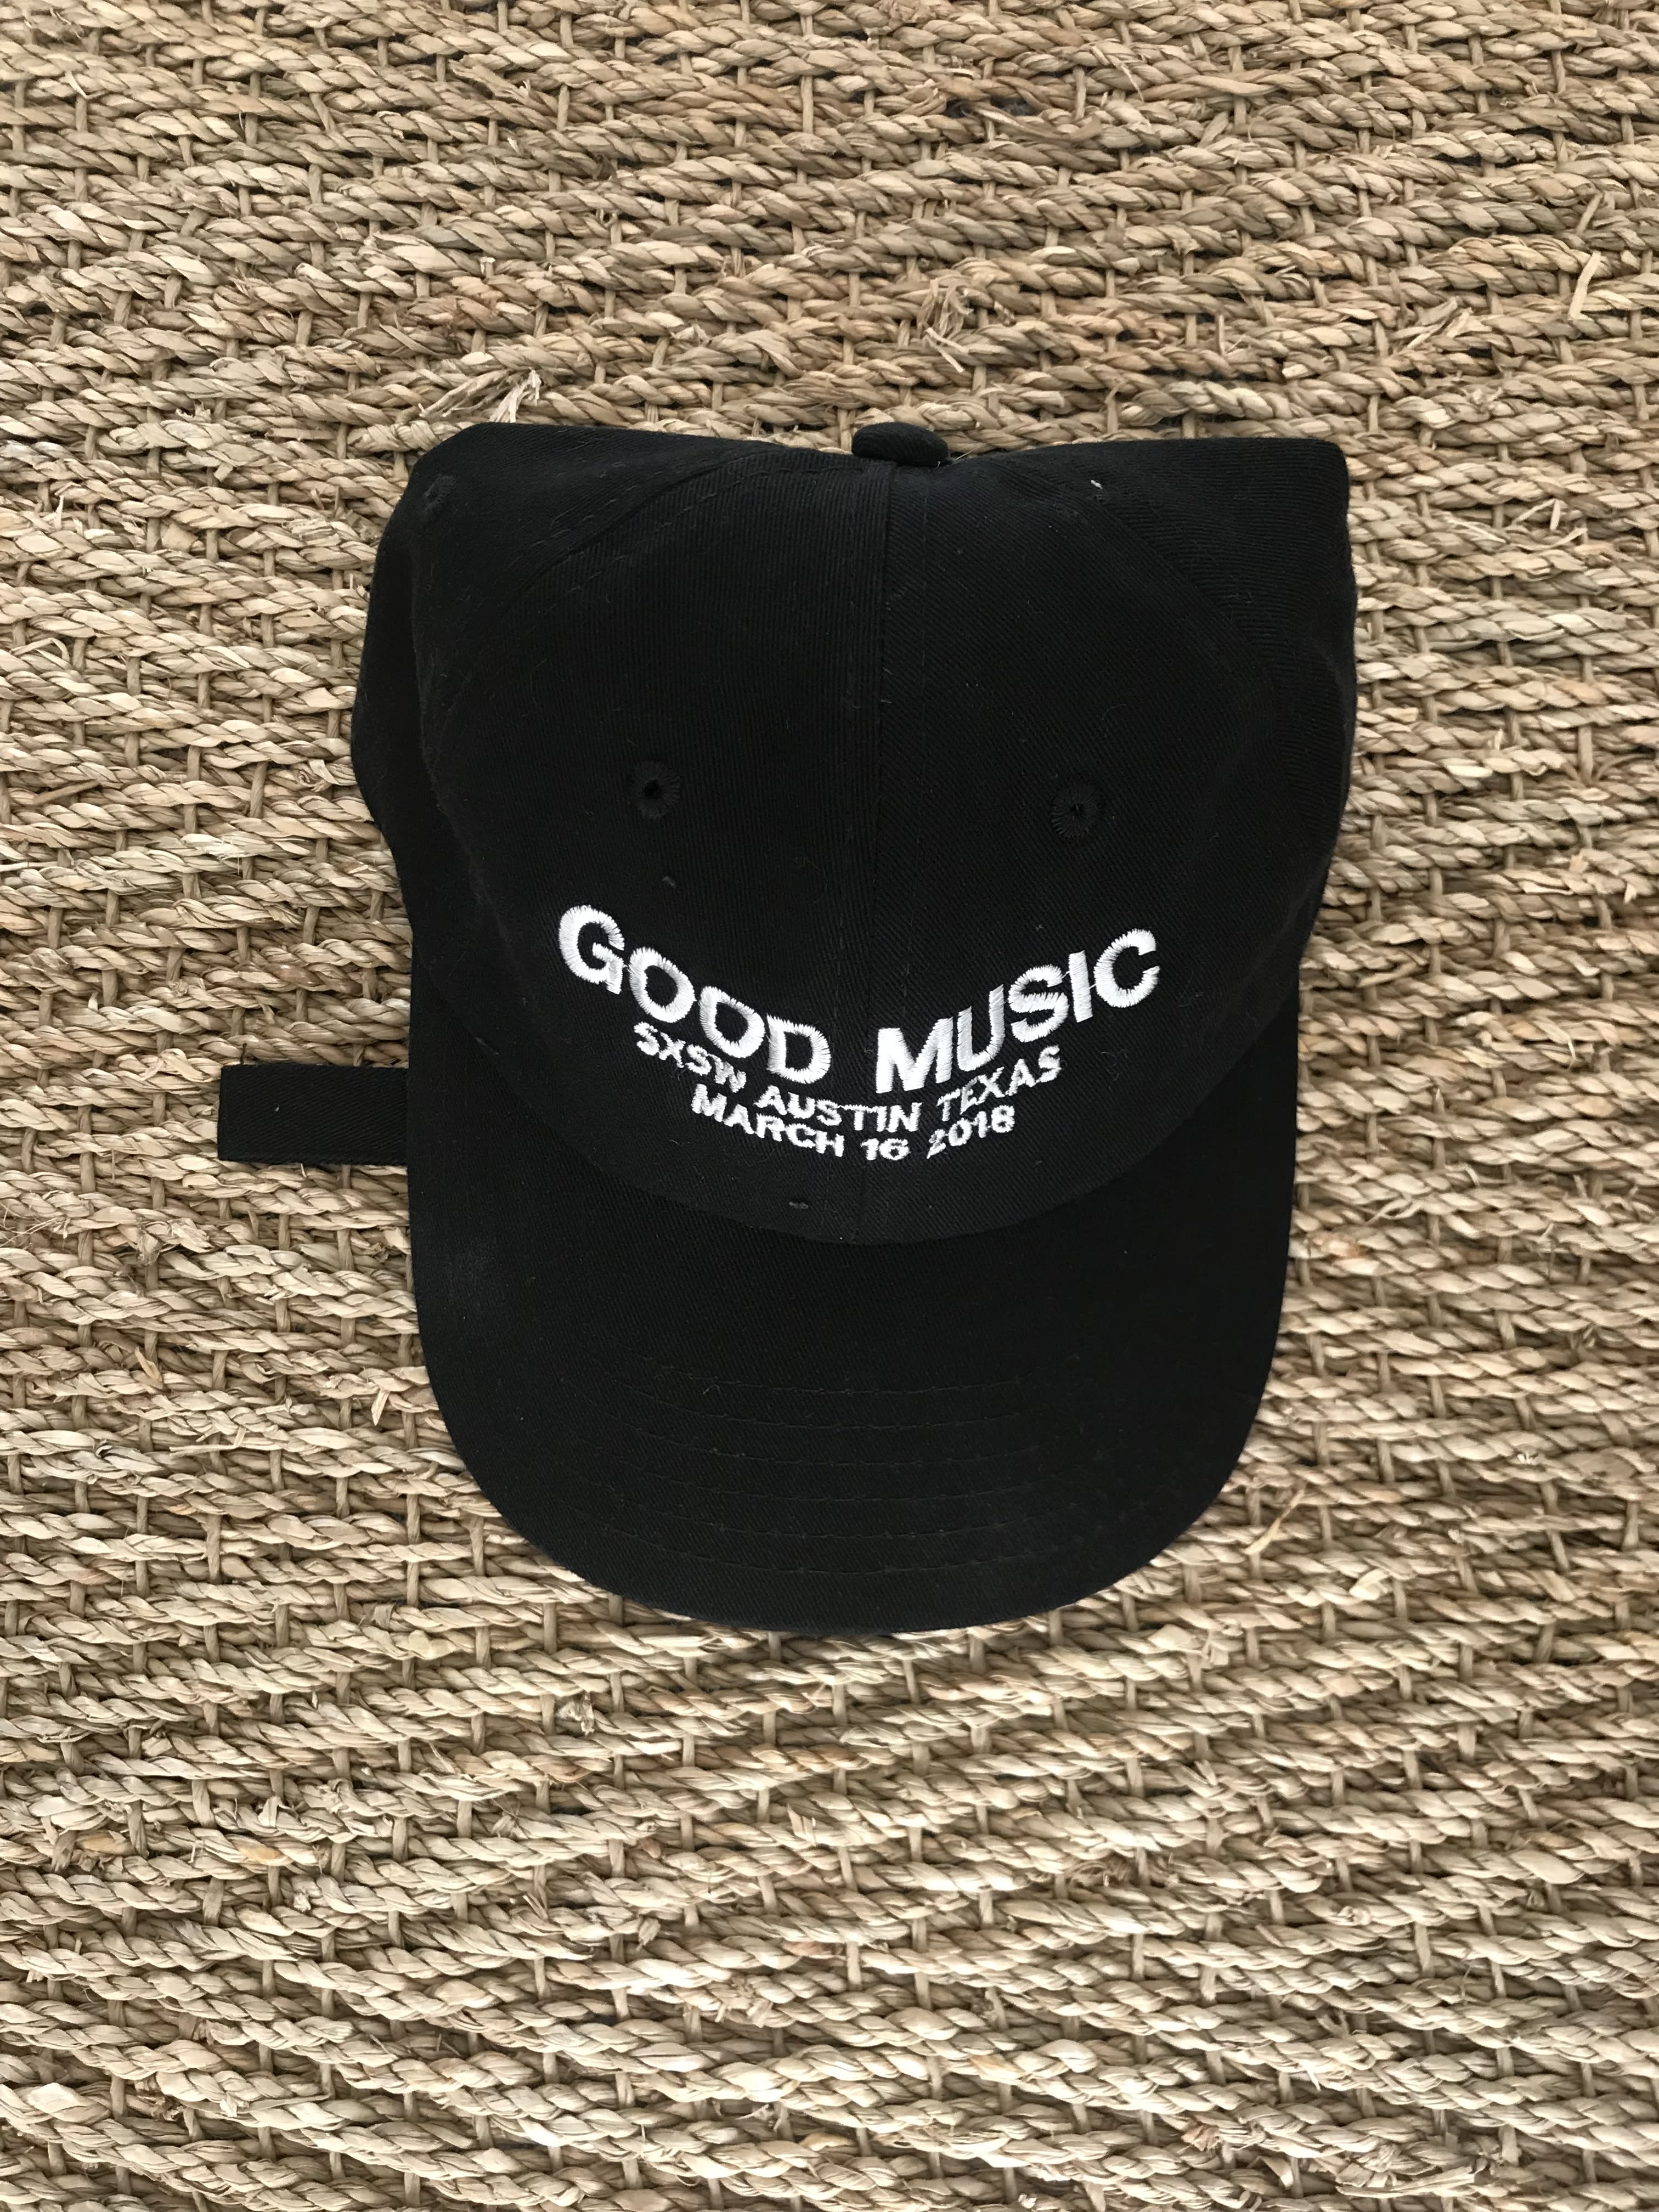 G.O.O.D. Music Partners With Stationhead for Interactive Experience at SXSW